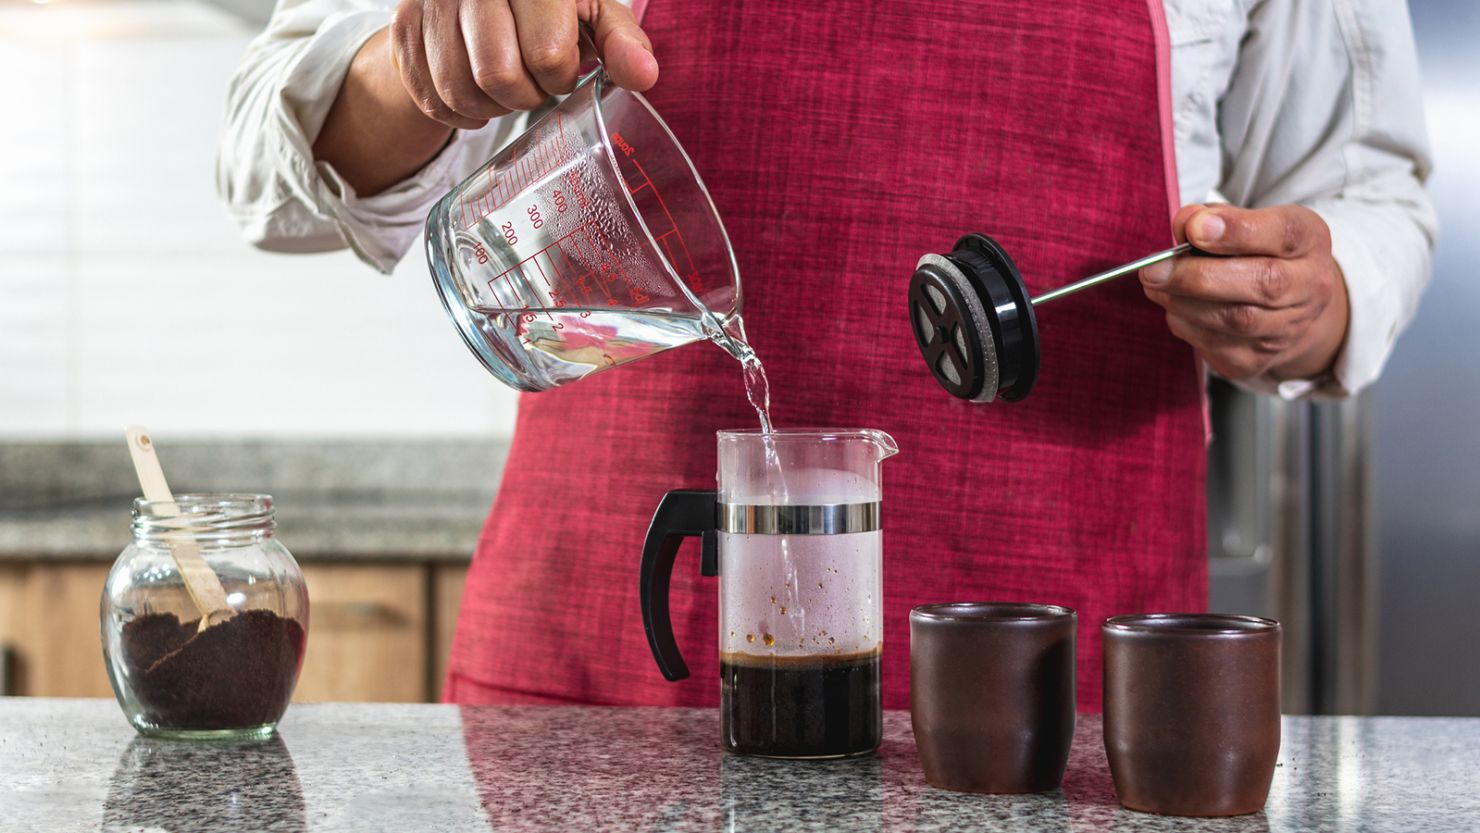 How to Clean a Coffee Maker to Make Your Brew Taste Better